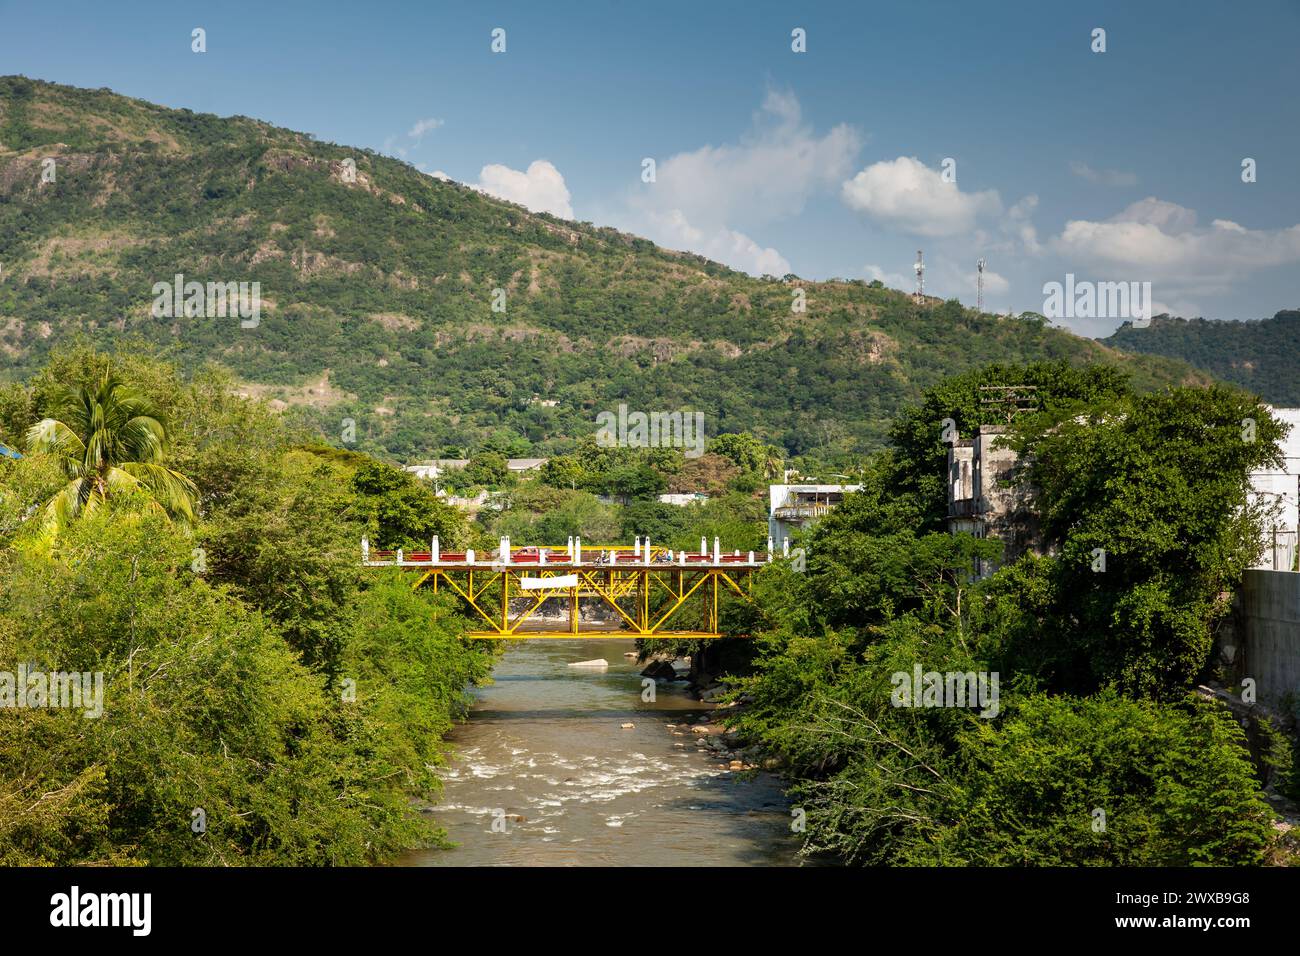 View of the Agudelo River over the Guali River in the Heritage Town of Honda in the Department of Tolima in Colombia Stock Photo